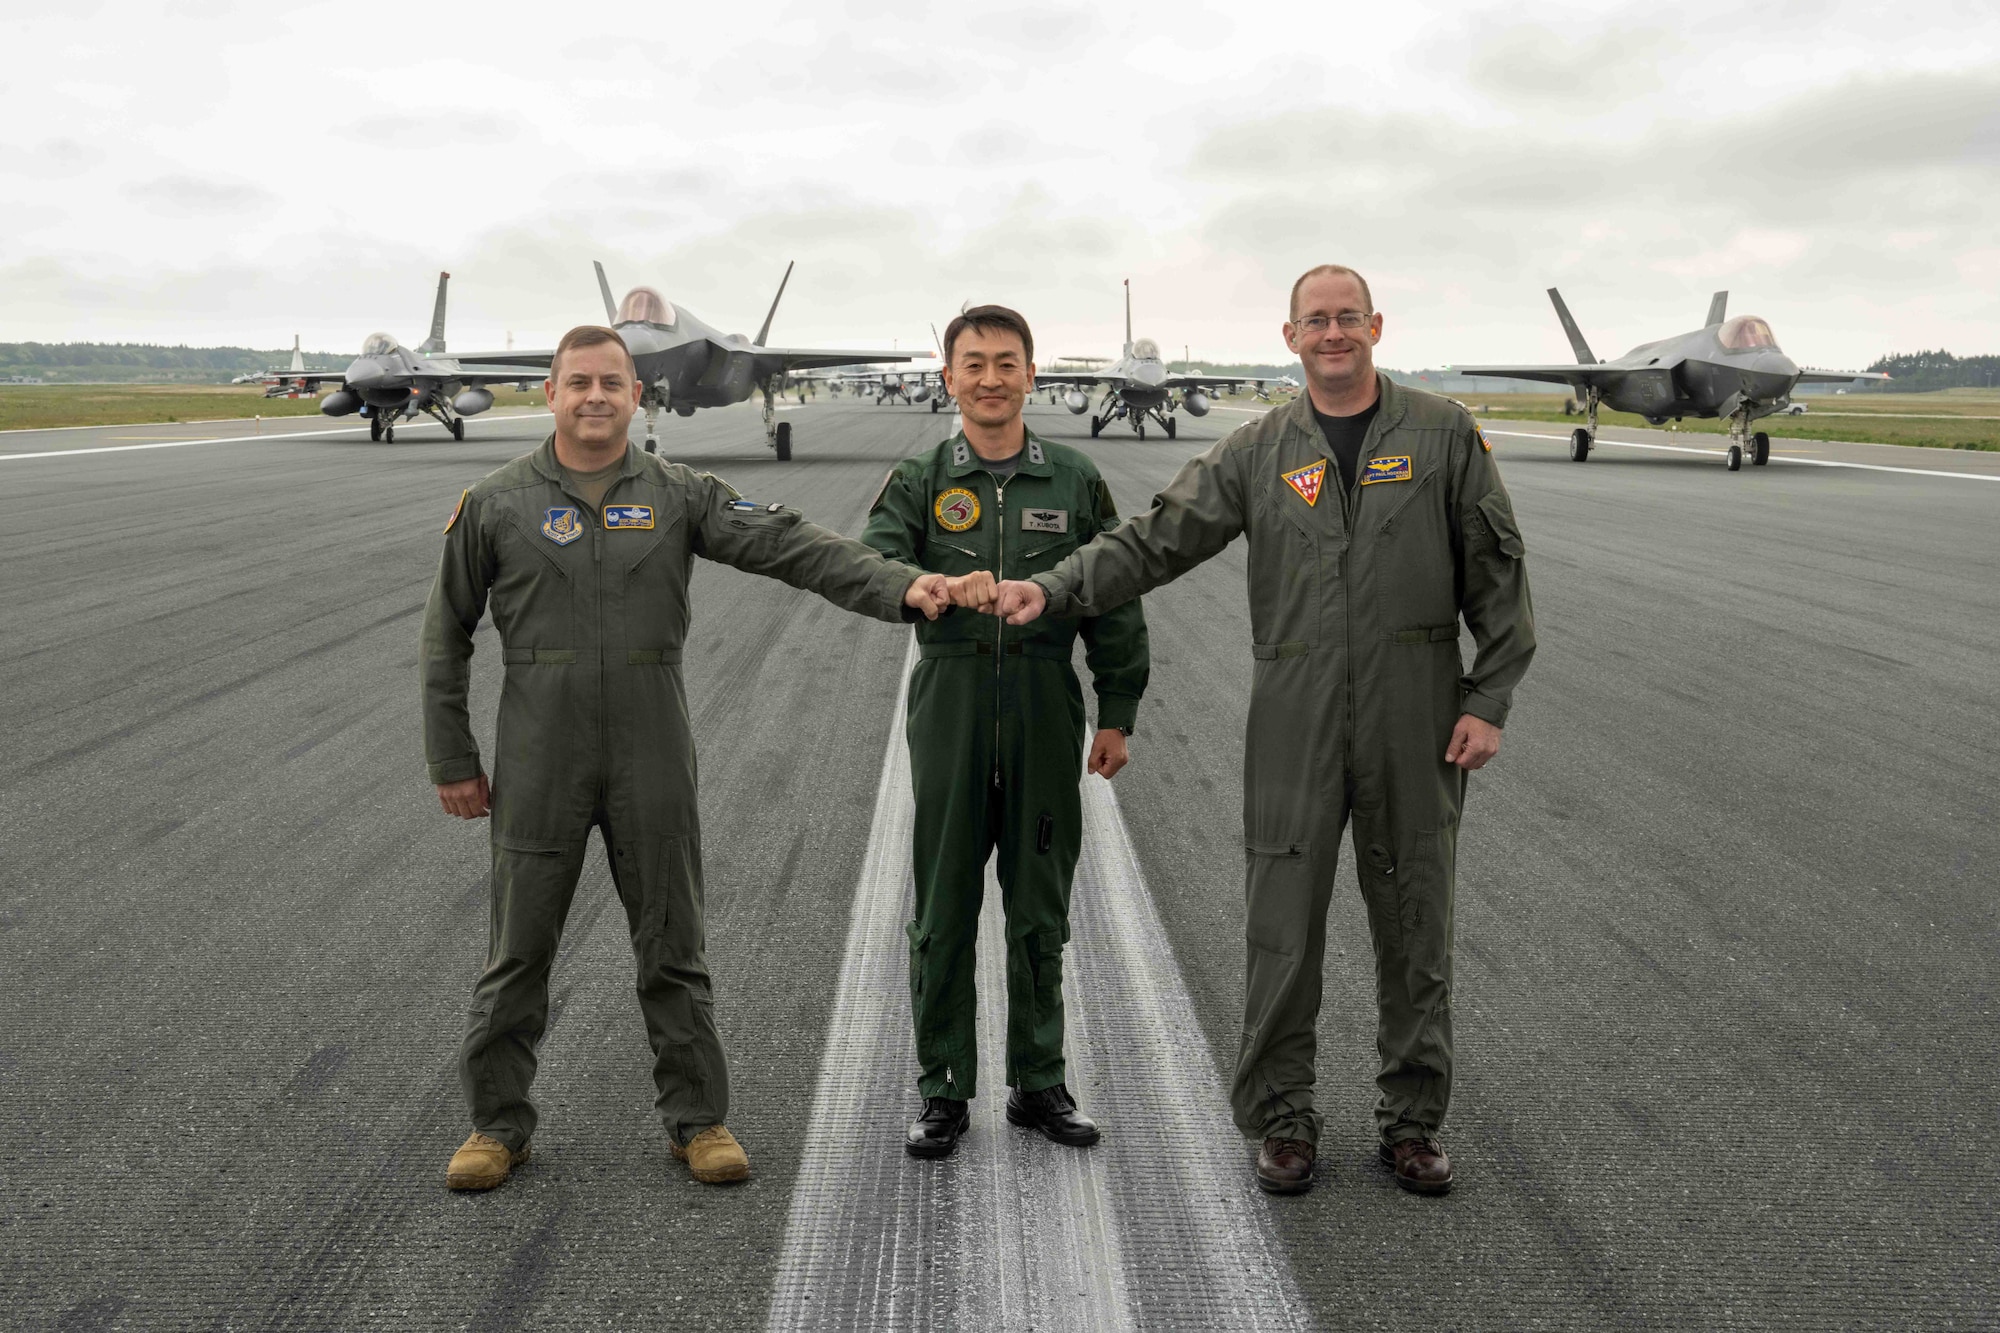 U.S. Air Force Col. Jesse J. Friedel, 35th Fighter Wing commander, Japan Air Self-Defense Force Maj. Gen. Takahiro Kubota, 3rd Air Wing commander, and U.S. Navy Capt. Paul Hockran, Naval Air Facility Misawa commanding officer, stand in front of aircraft assembled for a base capabilities demonstration to culminate a week-long readiness exercise at Misawa Air Base, Japan, May 13, 2022. The large formation displays the joint, bilateral capabilities of Misawa Air Base, with a mission to protect U.S. interests in the Pacific, defend Japan and deter adversaries through our presence, readiness, and ability to project combat air power. (U.S. Air Force photo by Airman 1st Class Joao Marcus Costa)